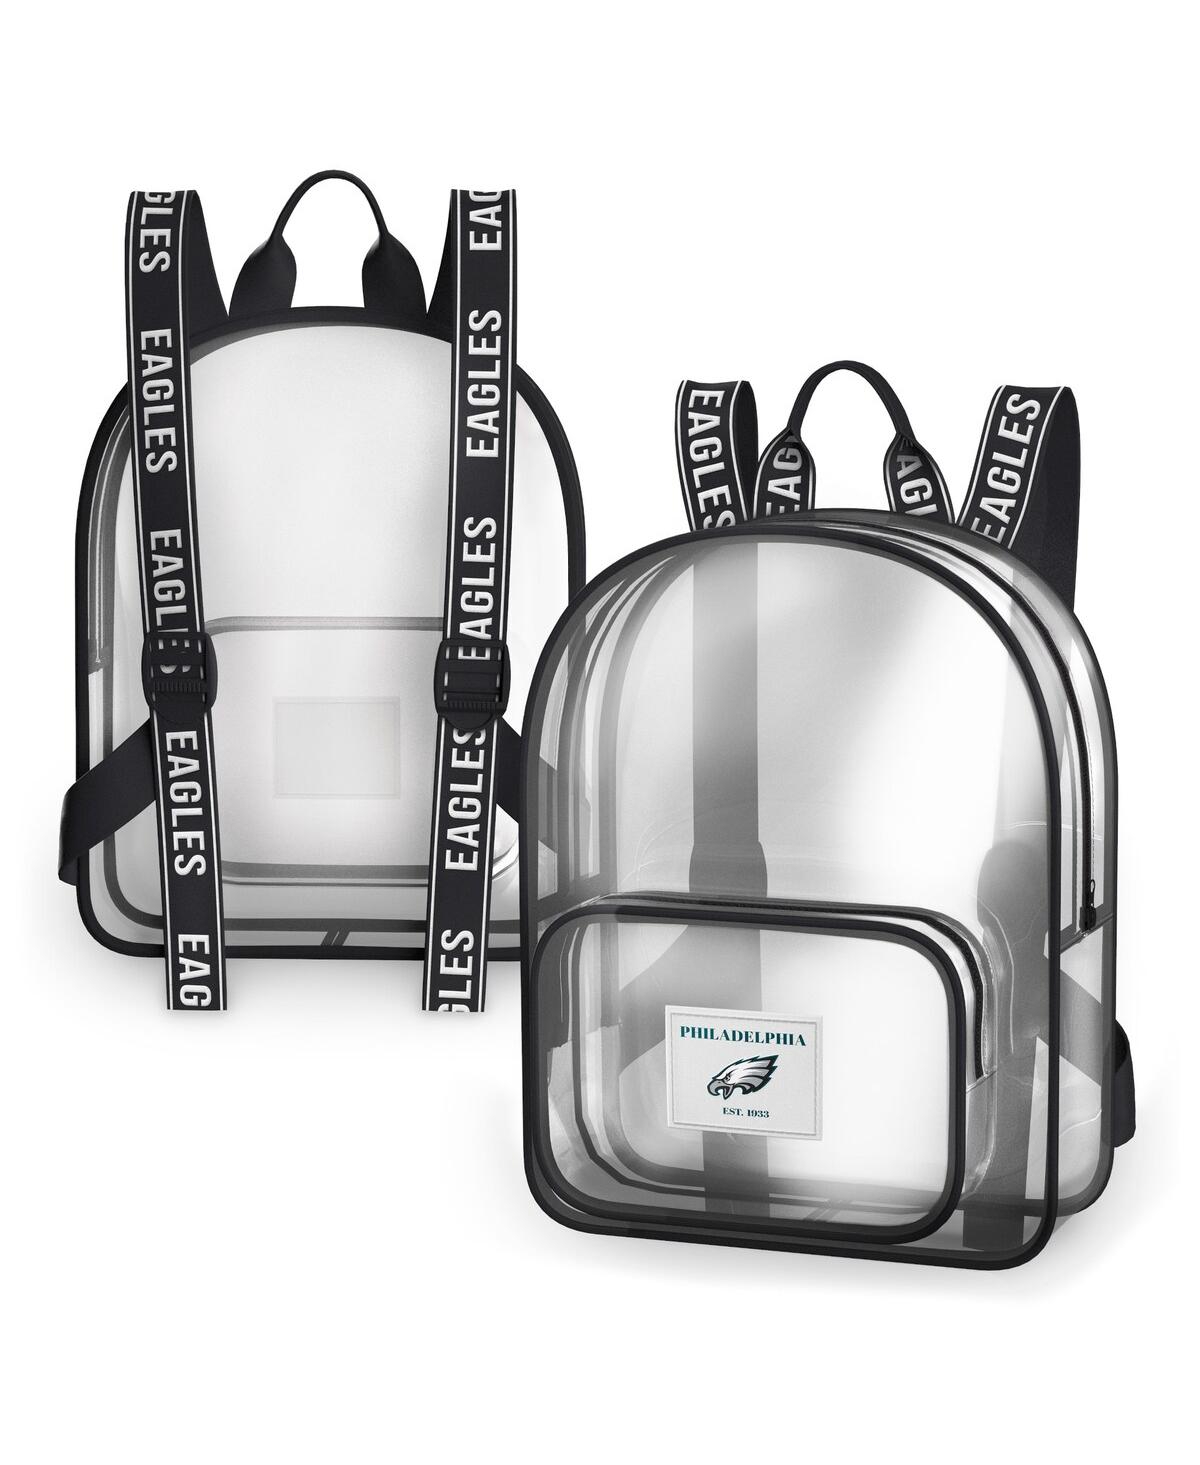 WEAR BY ERIN ANDREWS MEN'S AND WOMEN'S WEAR BY ERIN ANDREWS PHILADELPHIA EAGLES CLEAR STADIUM BACKPACK